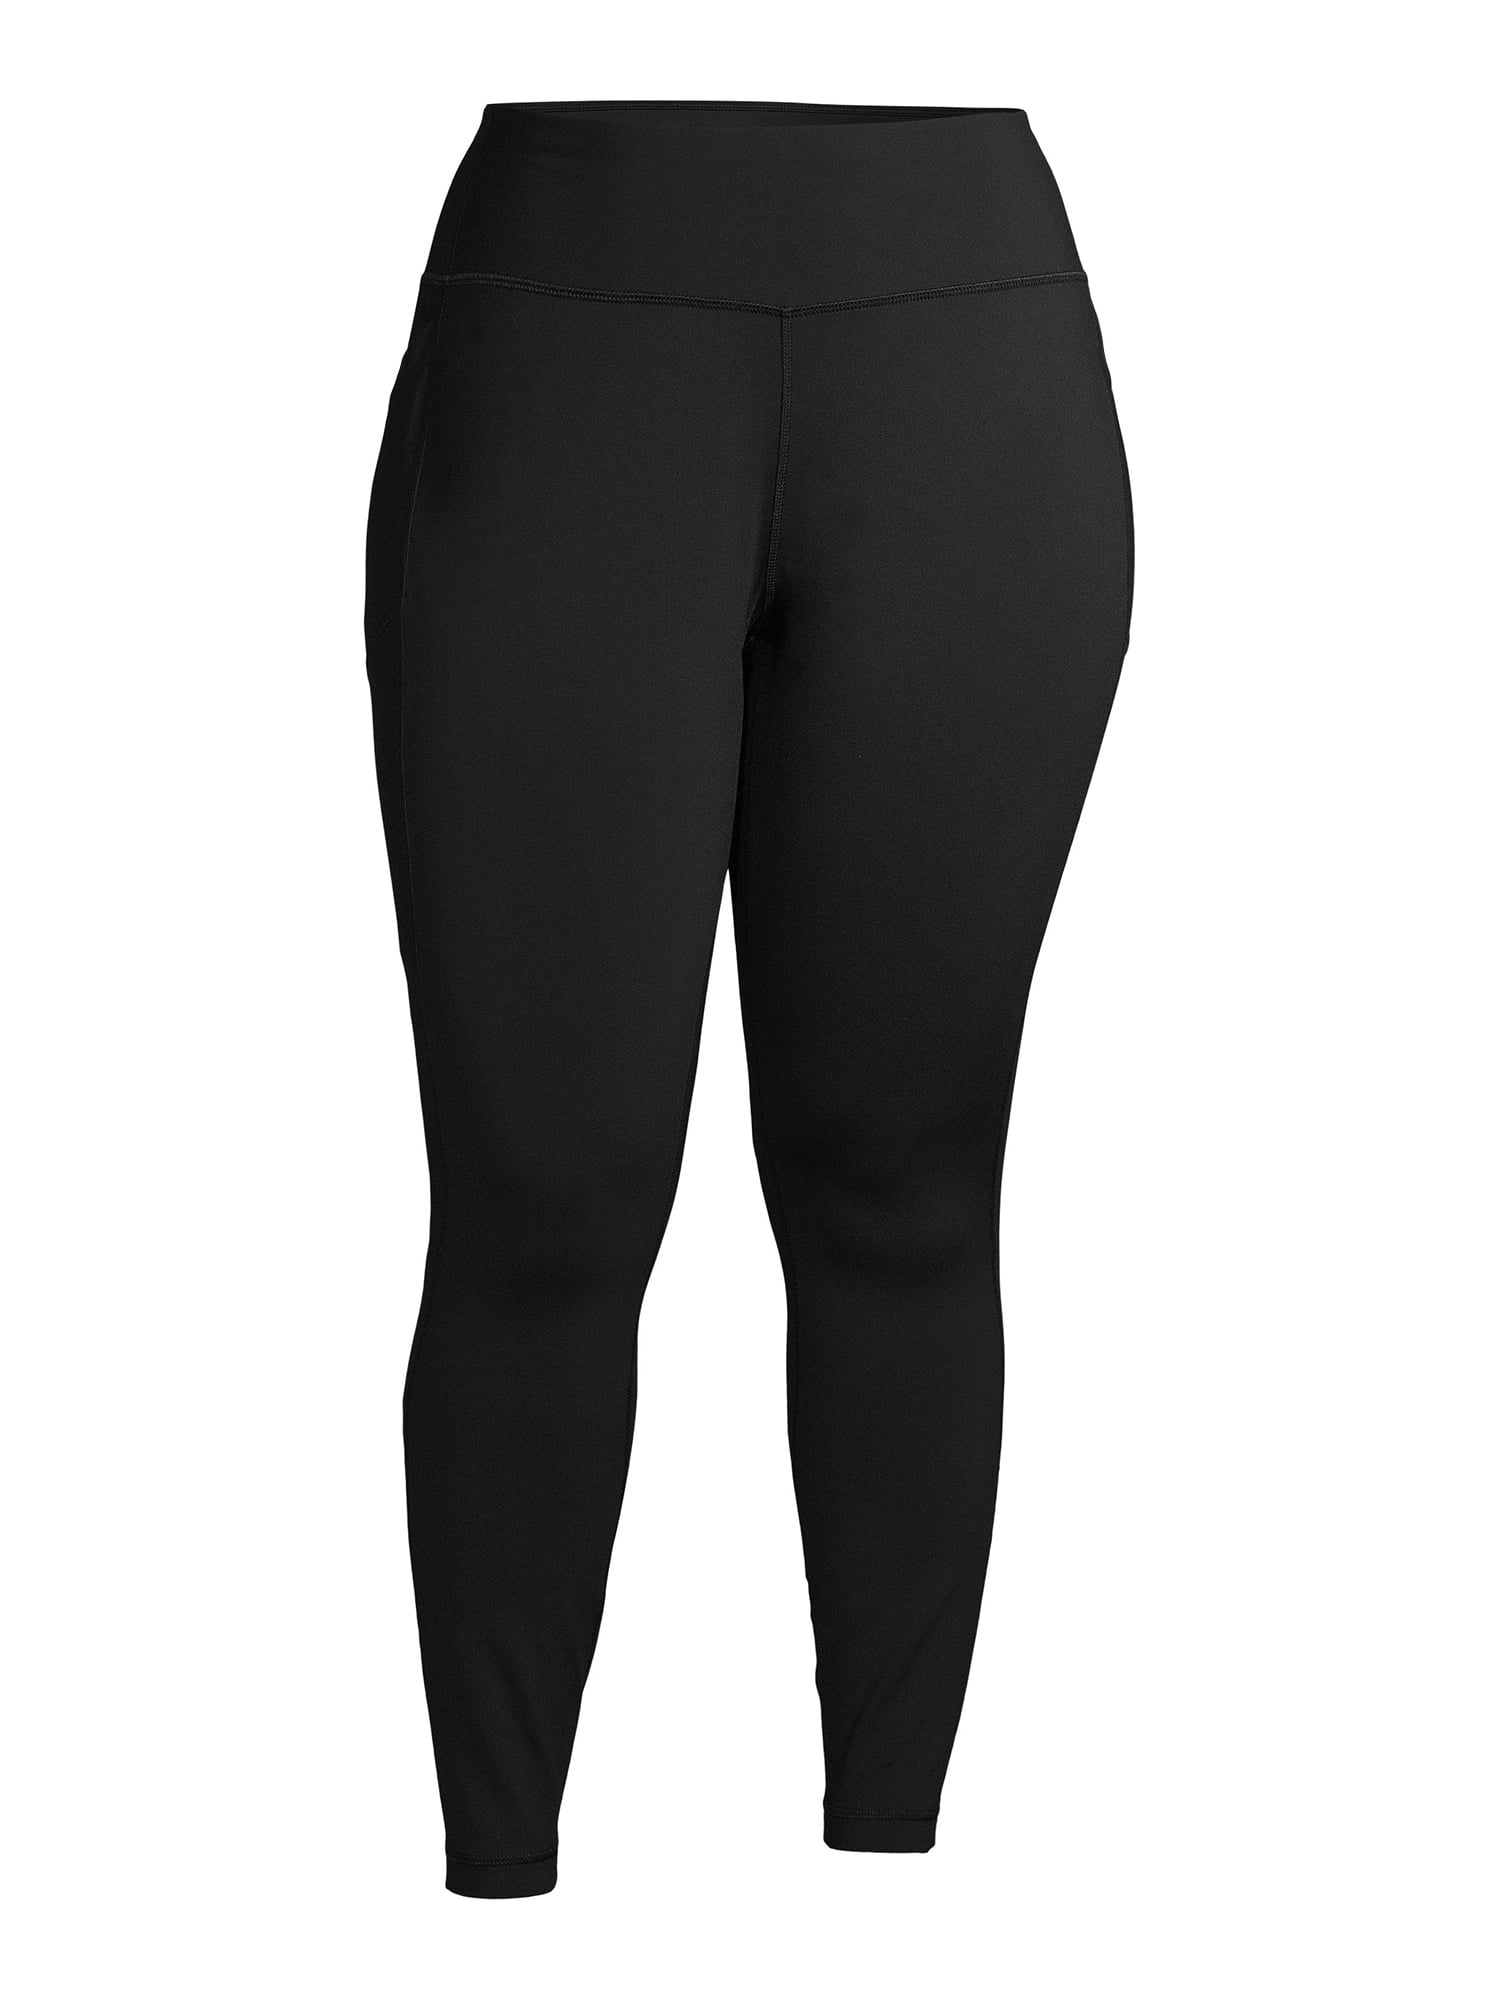 Avia Women's Plus Size High Waisted Moisture Wicking Leggings with Phone  Pocket 